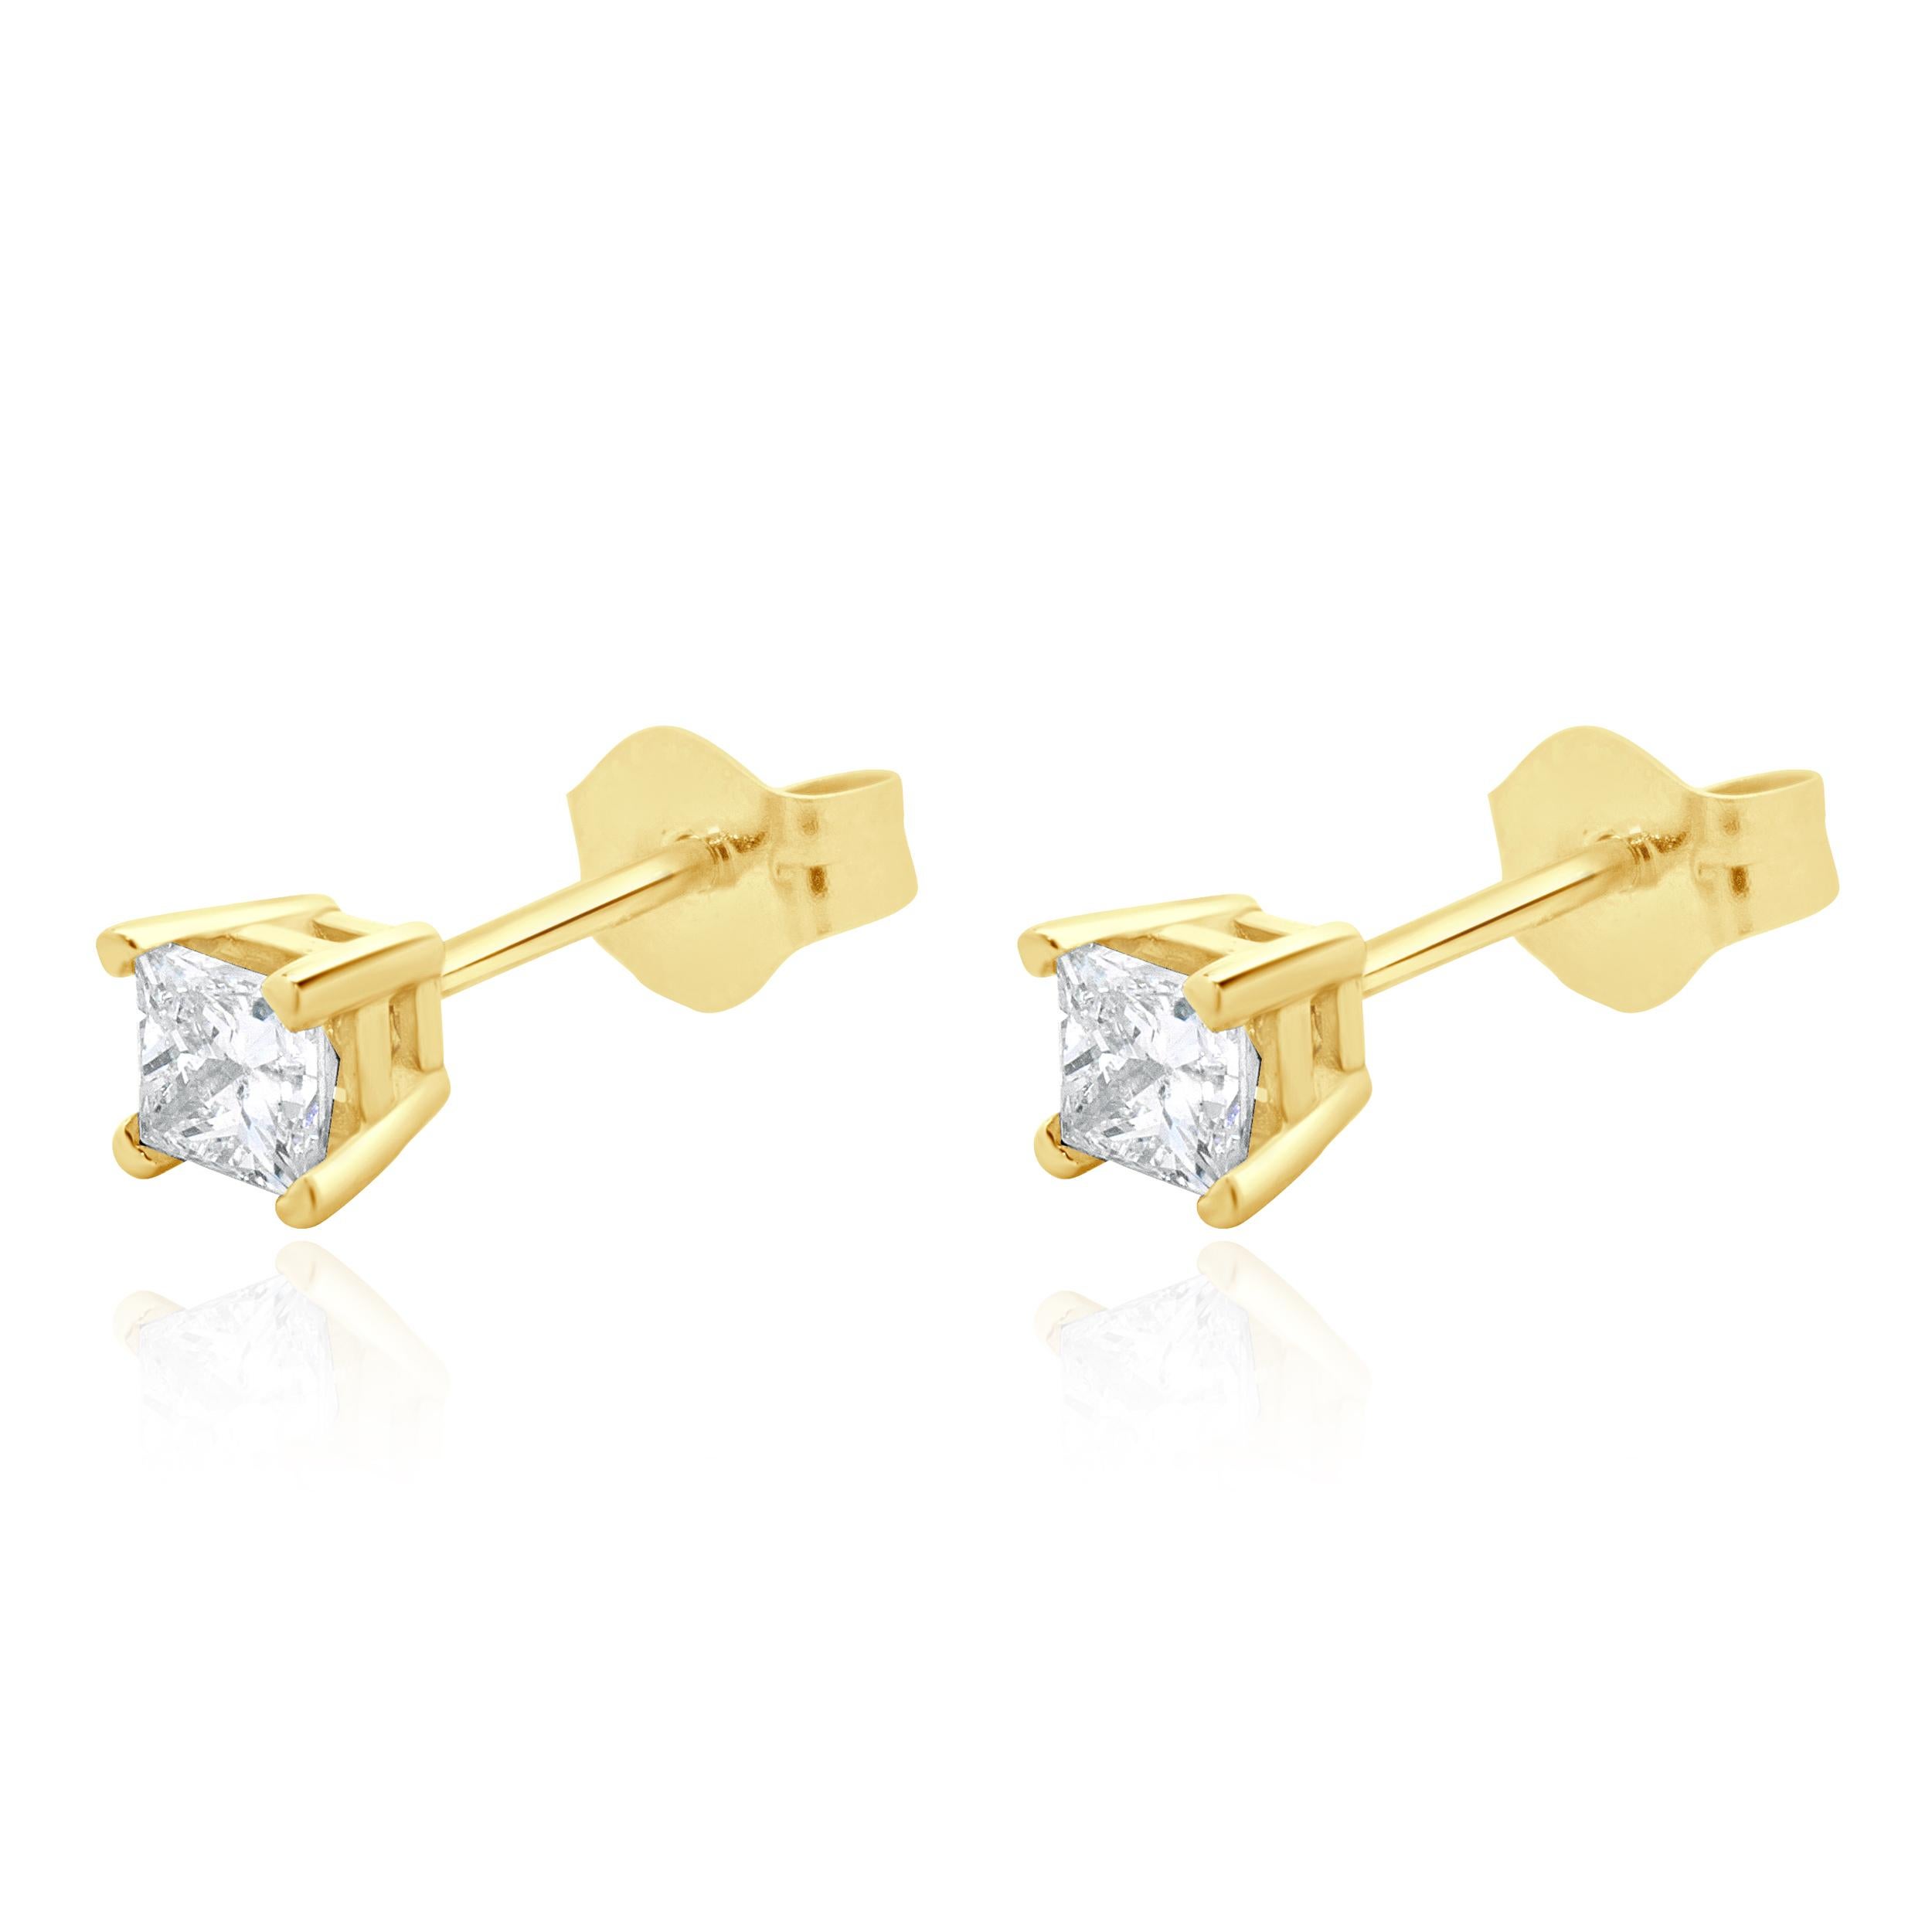 Material: 14K yellow gold
Diamonds: 2 princess cut = 0.40cttw
Color: G / H
Clarity: VS1
Dimensions: earrings measure approximately 4mm in diameter
Fastenings: friction backs
Weight: 0.60 grams
